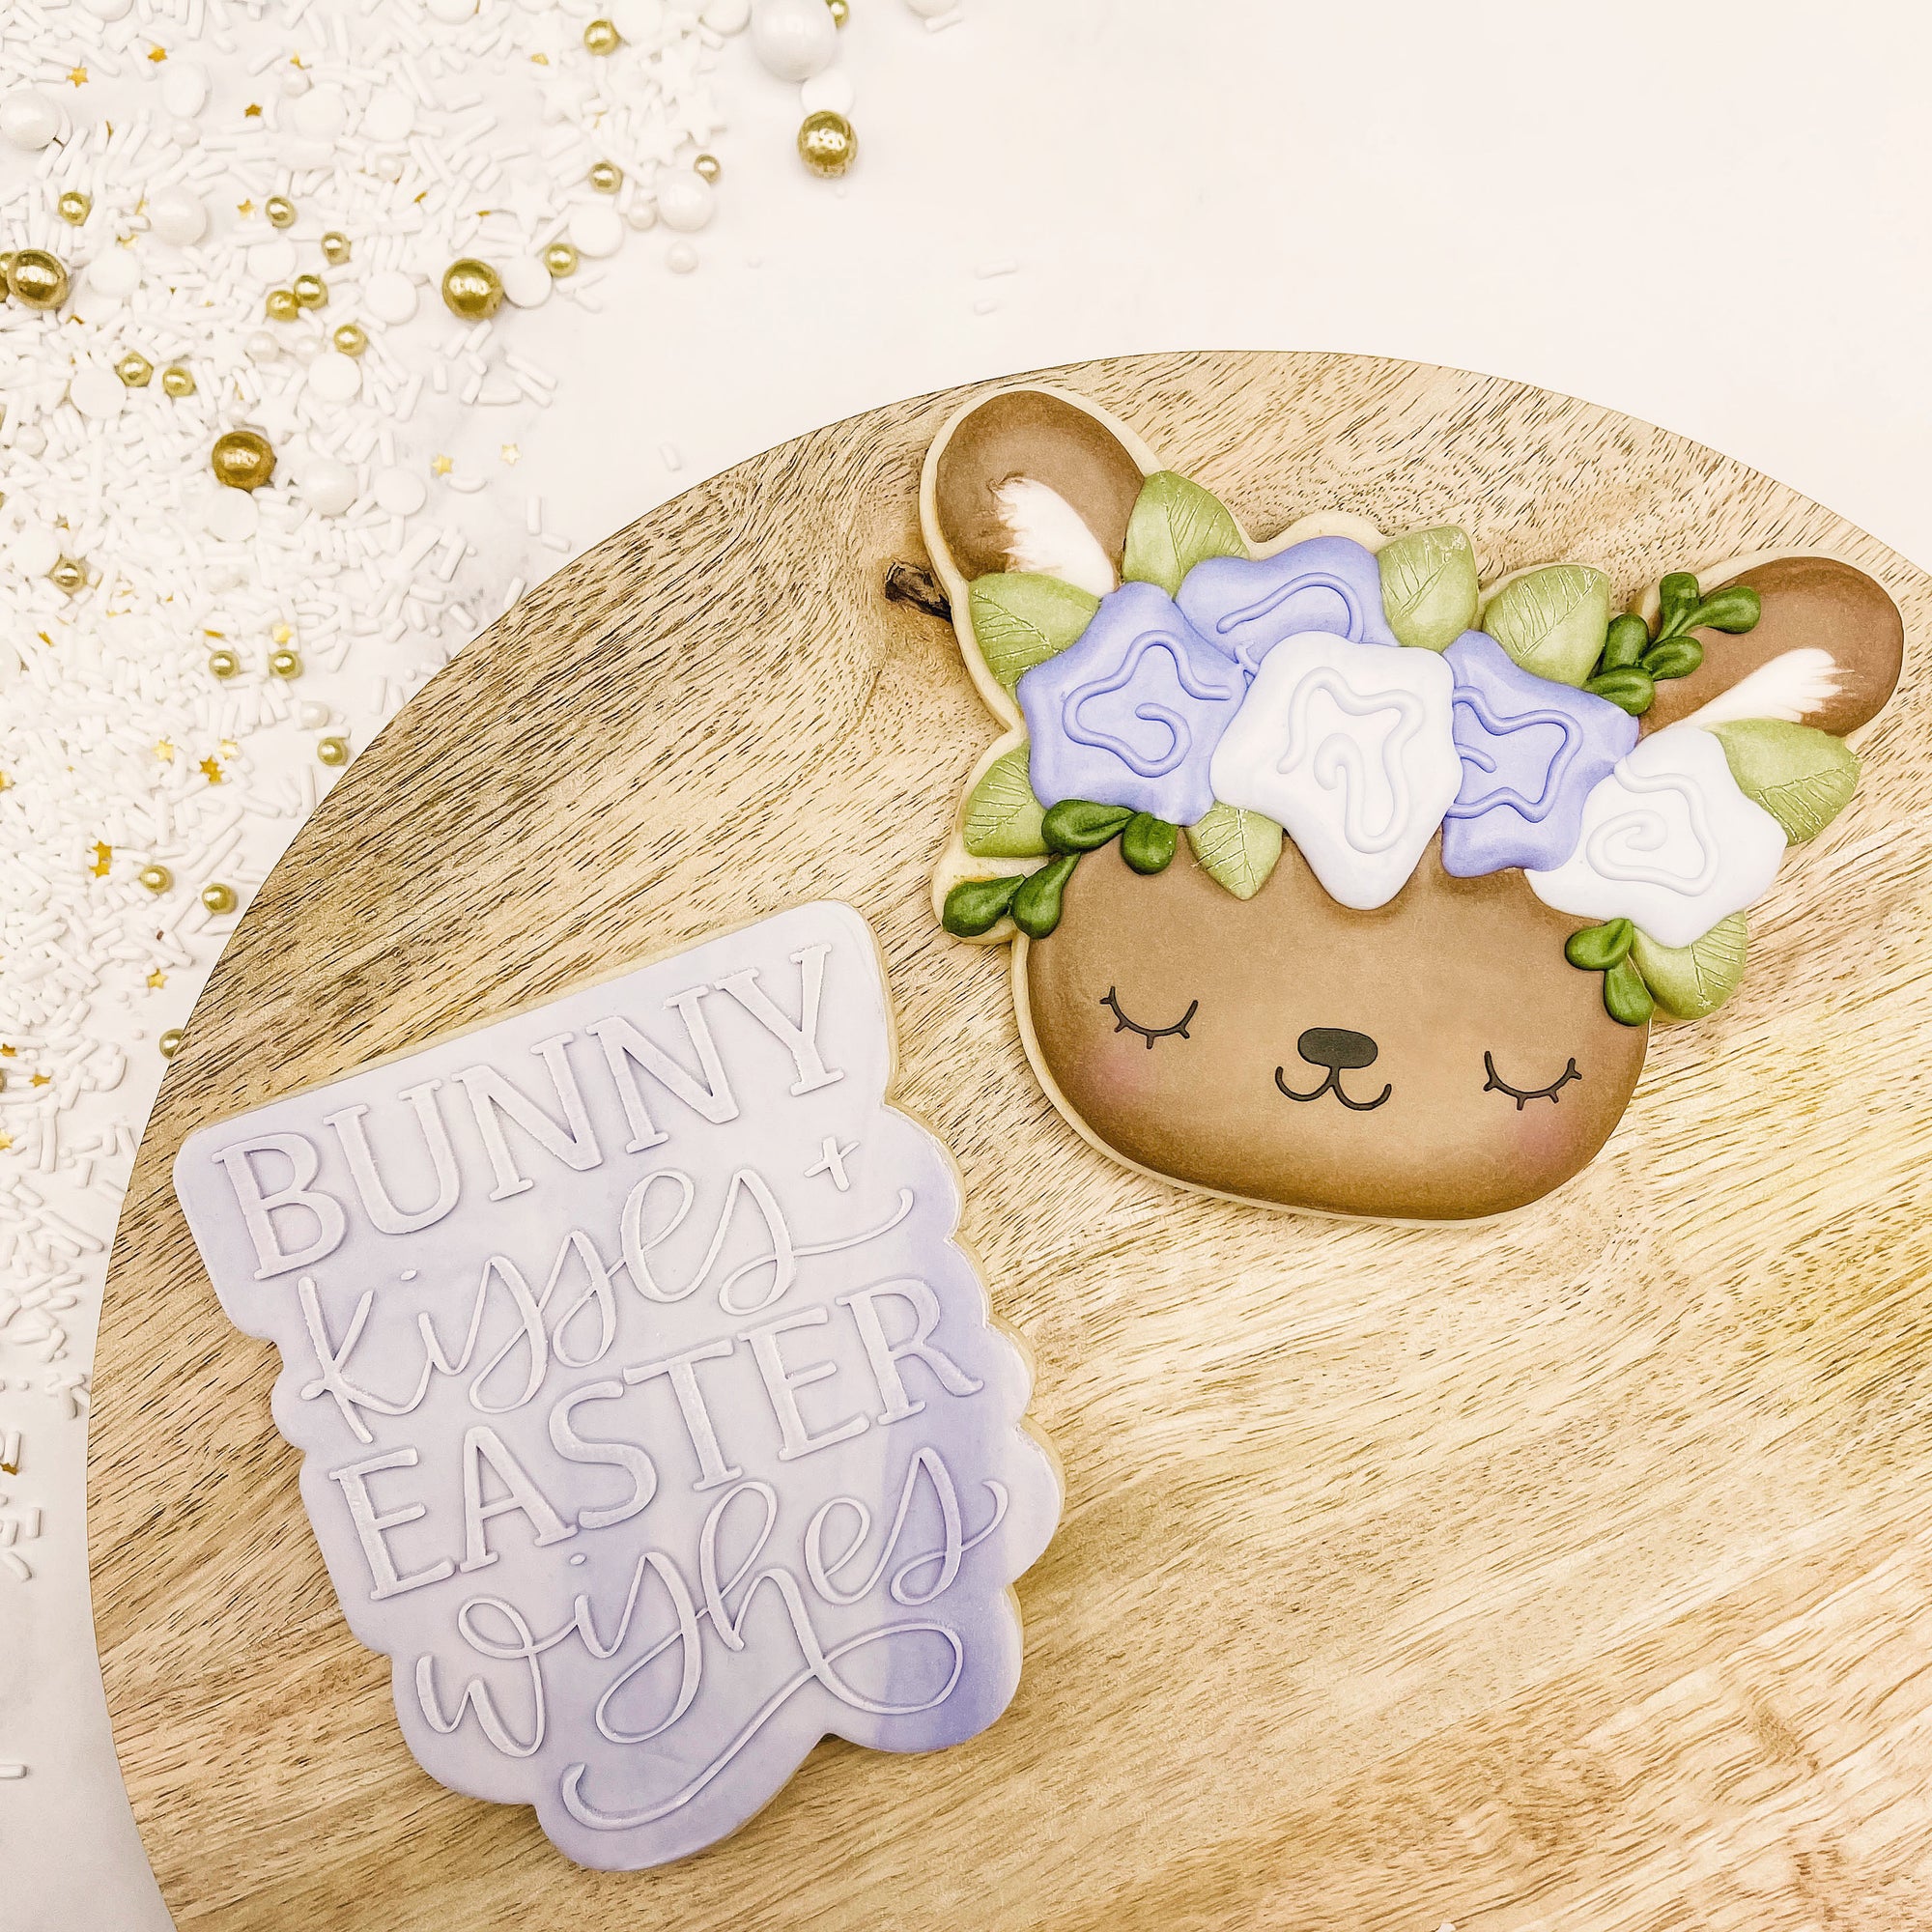 Bunny Kisses + Easter Wishes Hand Lettered